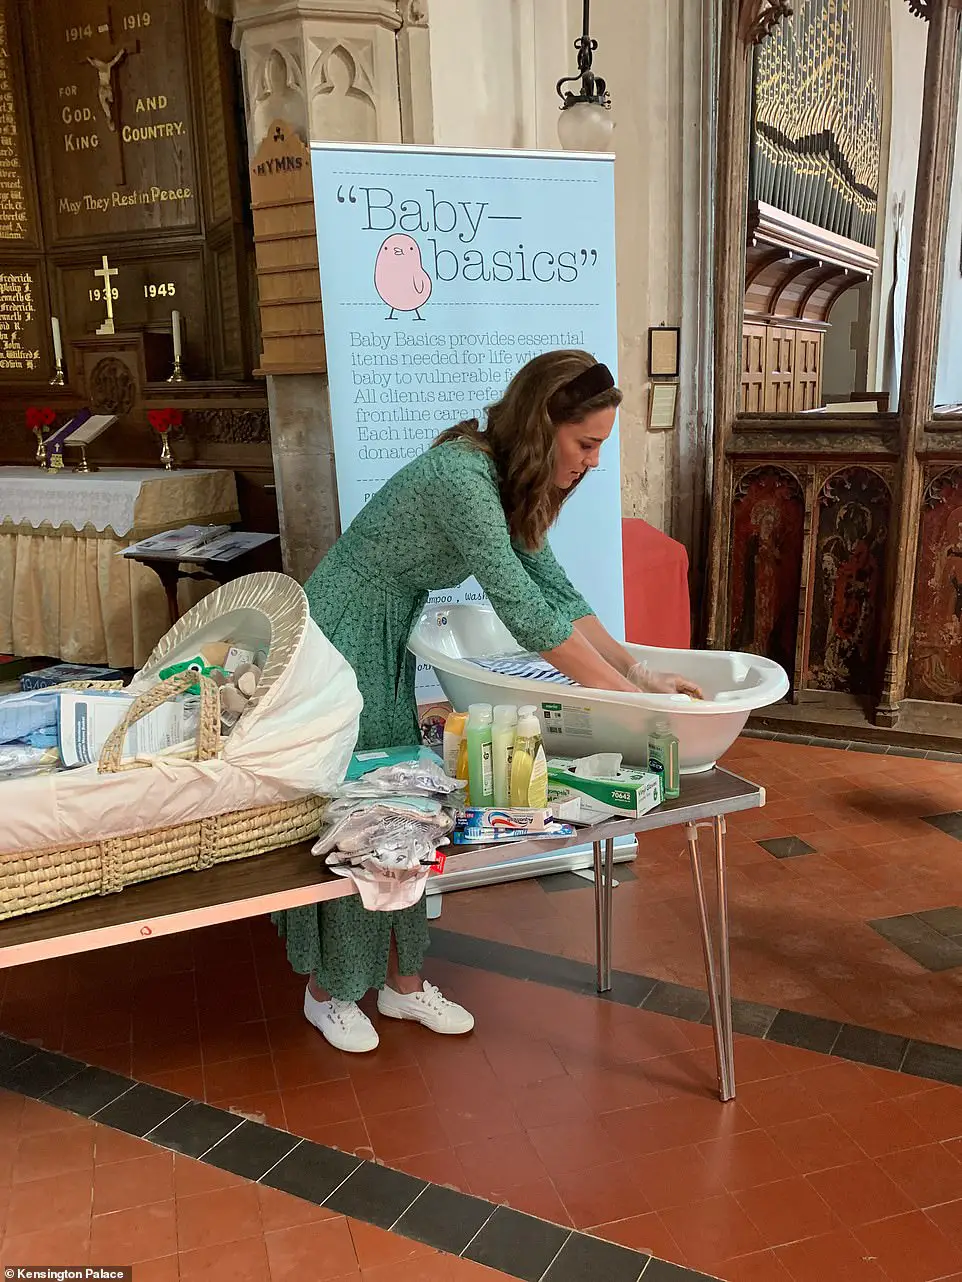 Princess Catherine worked with Baby basics, Little Village and AberNecessities in 2020 during the middle of the pandemic.